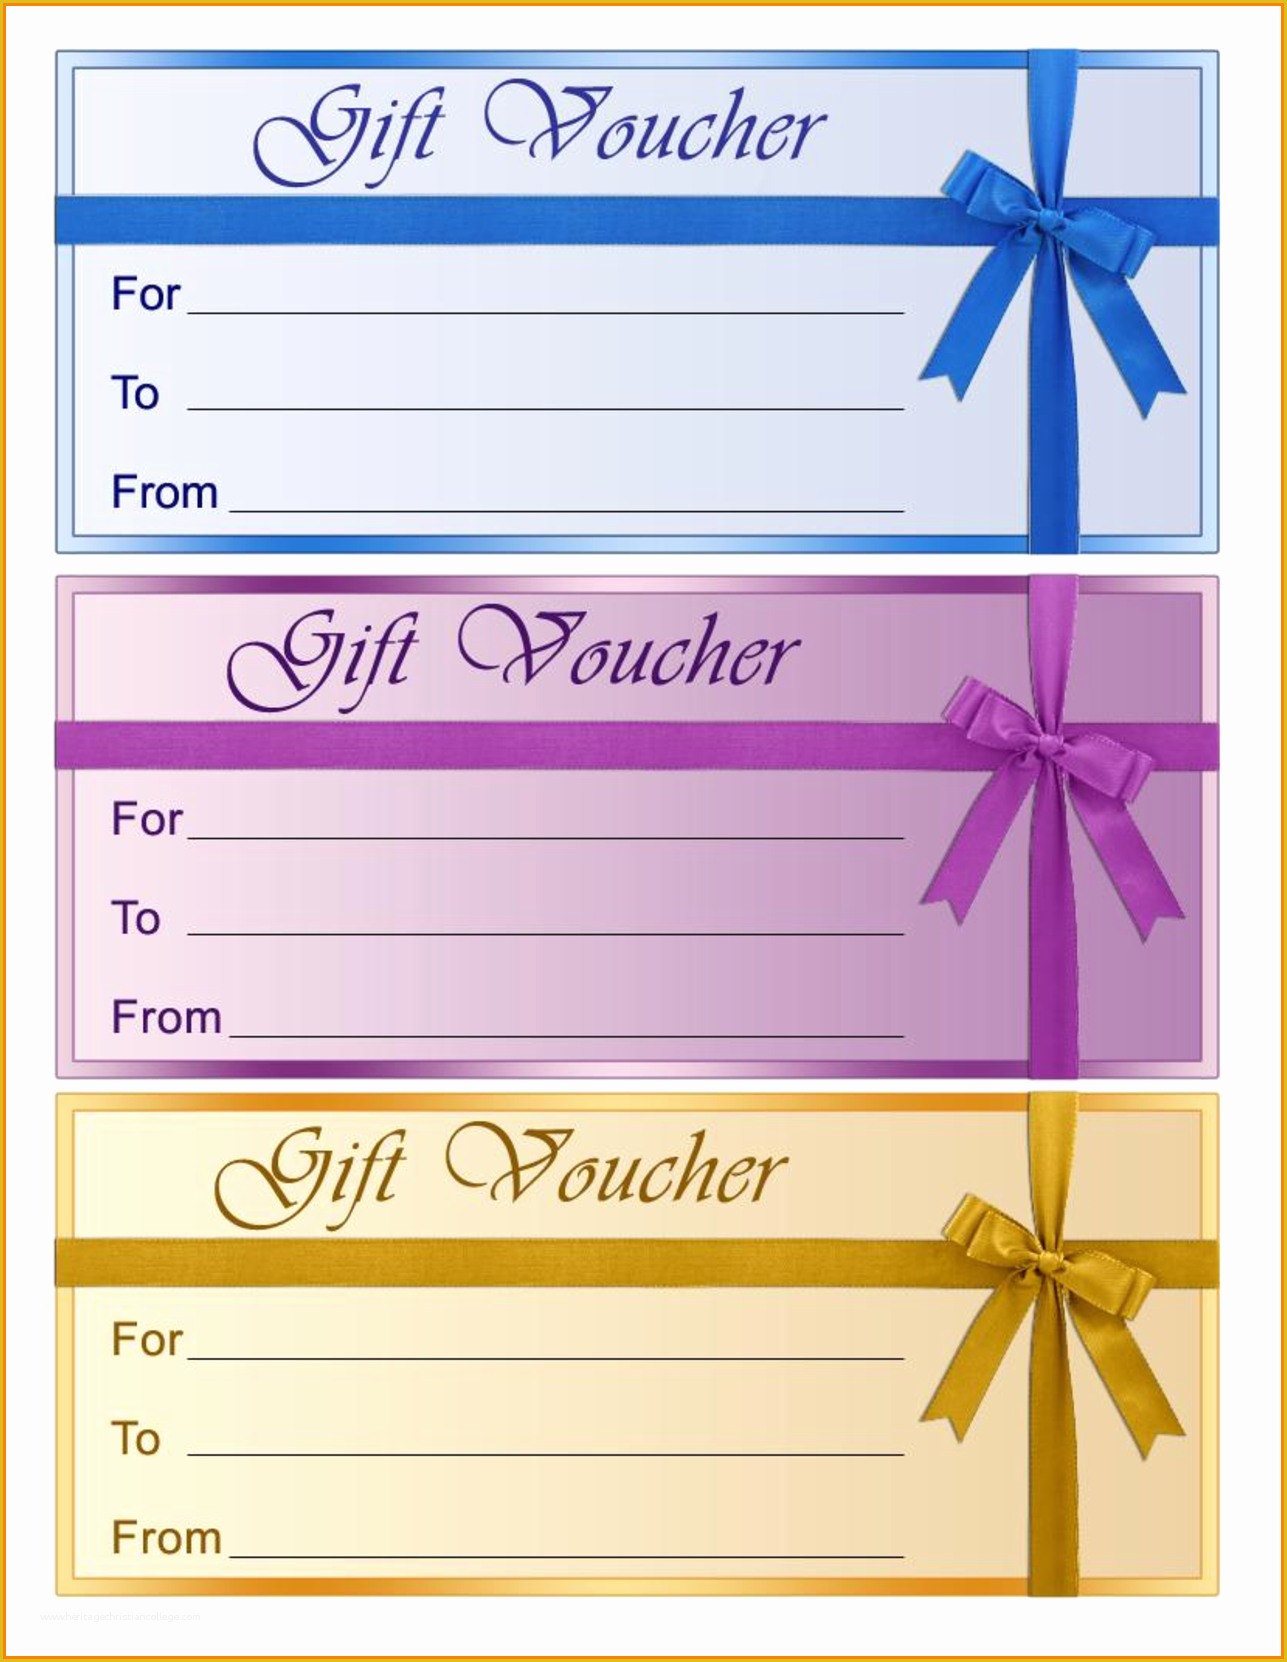 Gift Certificate Template Free Download Of Perfect format Samples Of Gift Voucher and Certificate